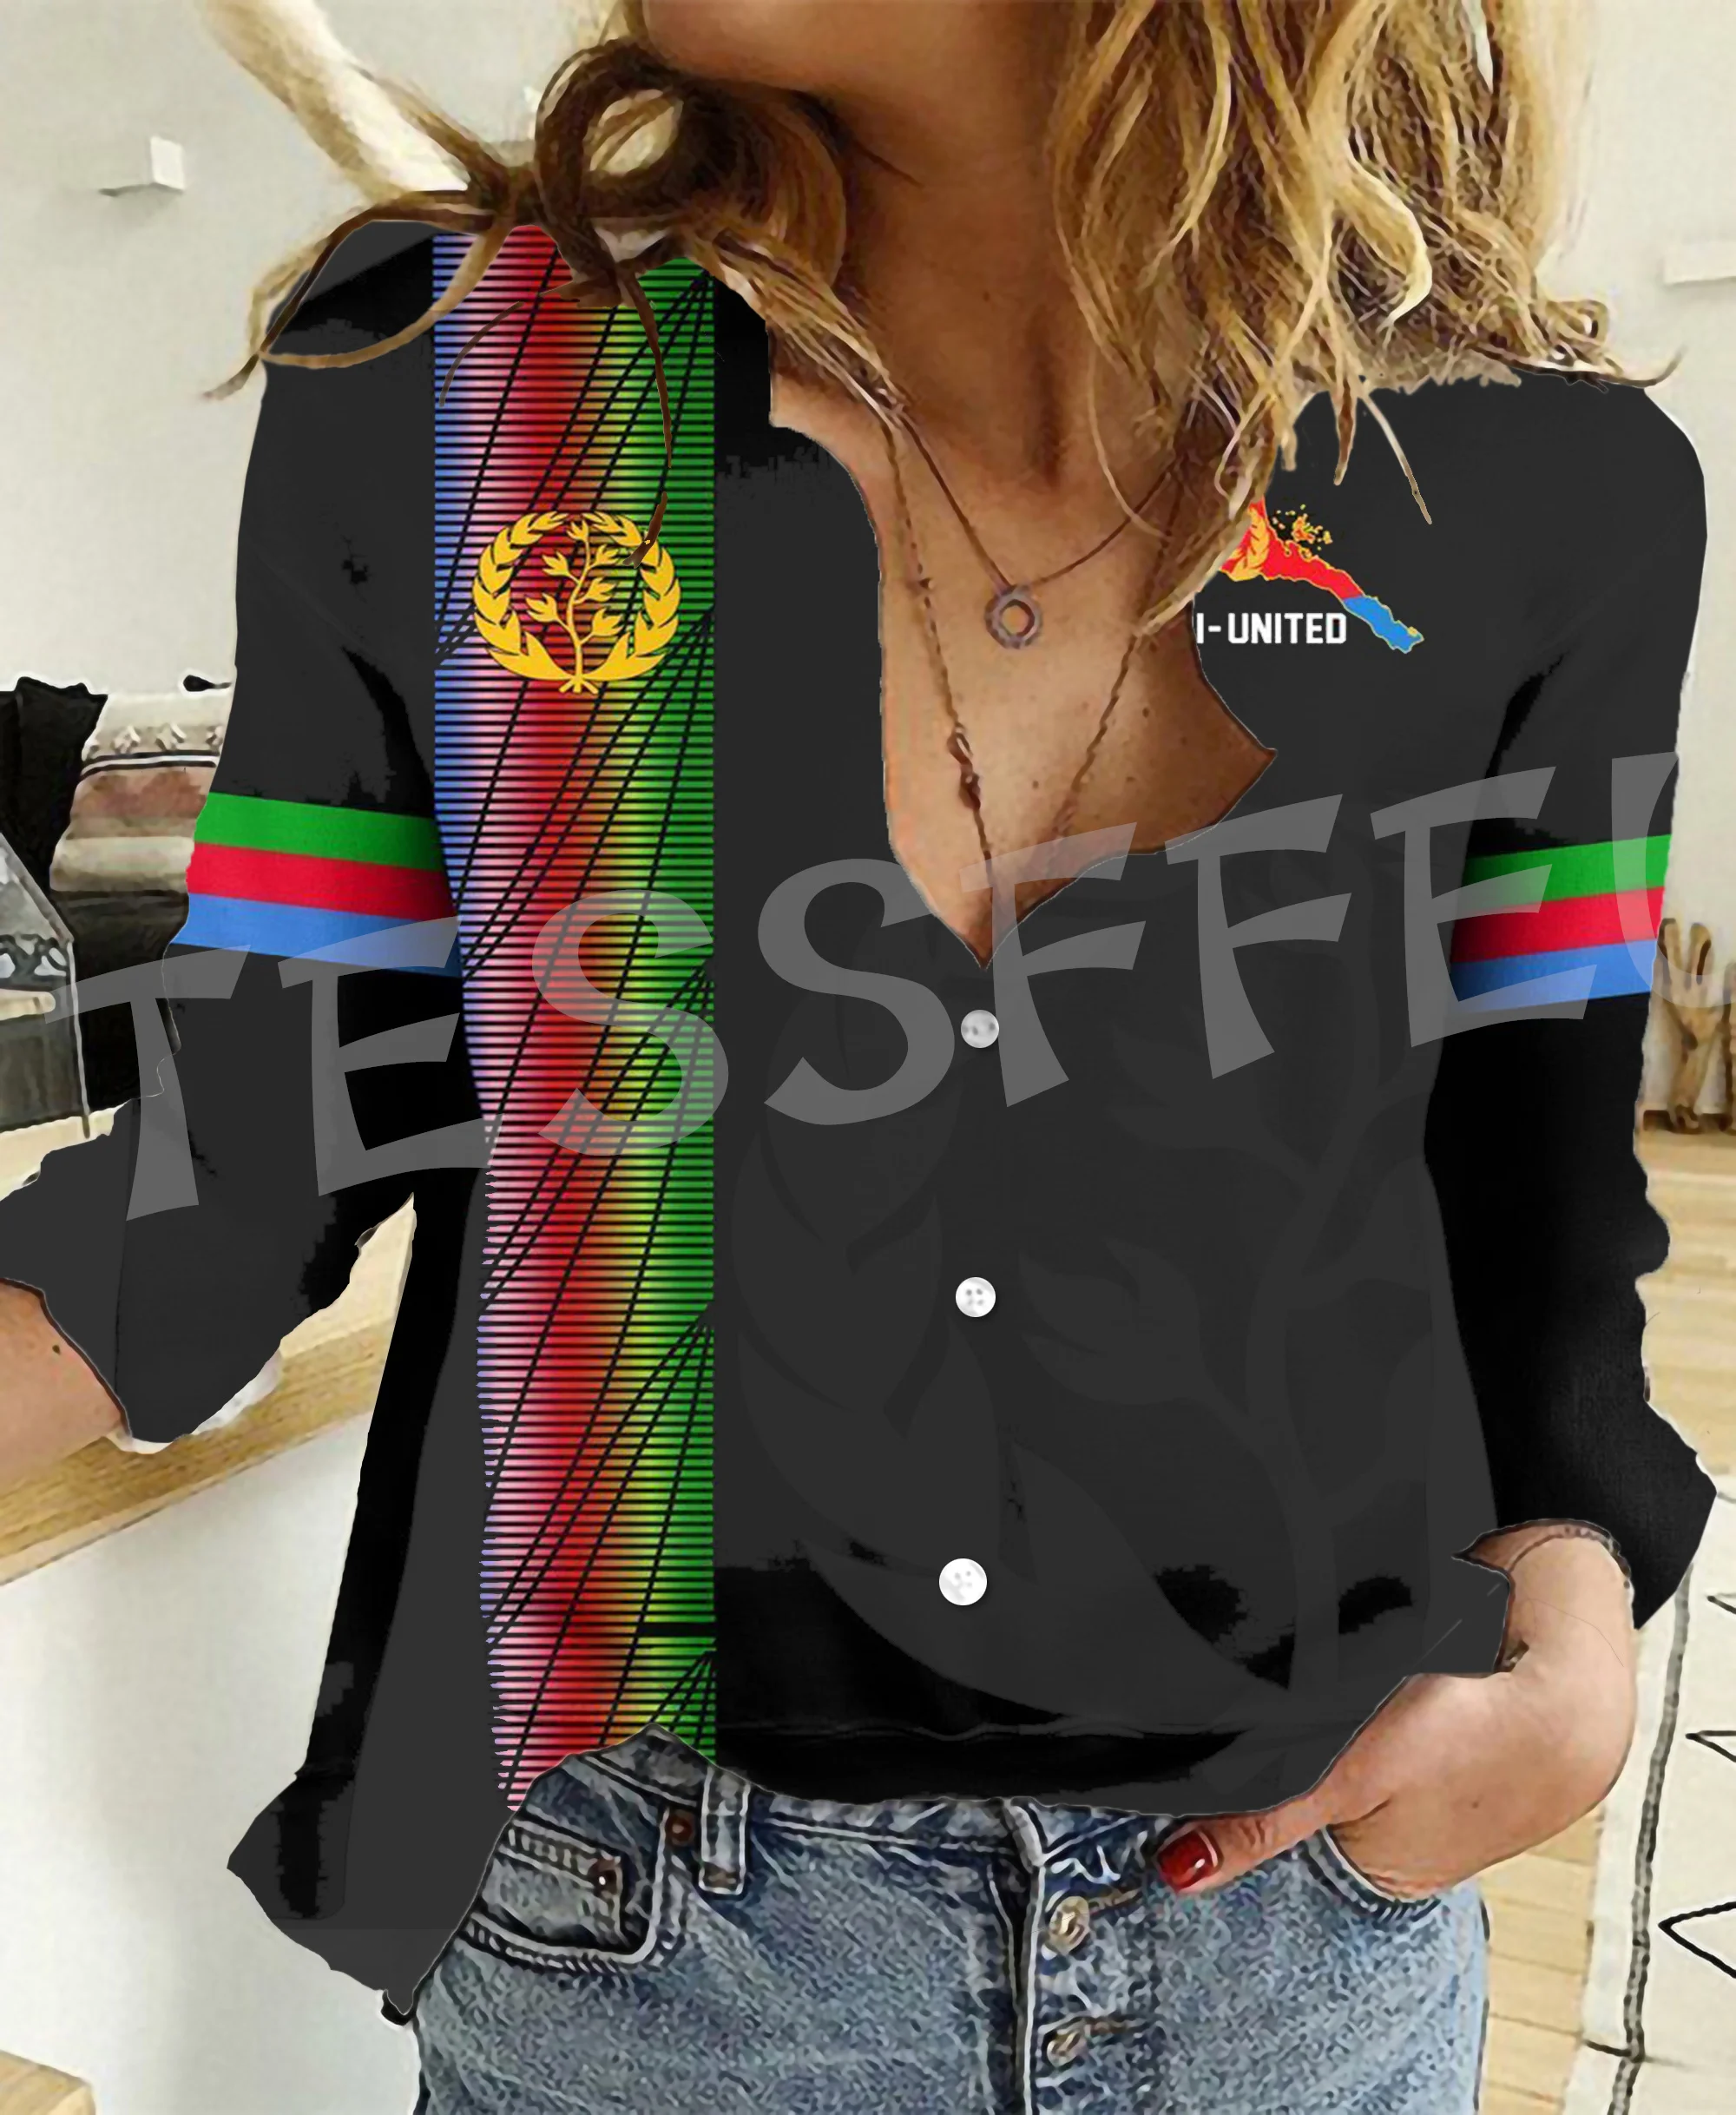 Africa County Eritrea Flag Lion Tattoo Retro Vintage Streetwear 3DPrint Harajuku Women Casual Button-Down Shirts Long Sleeves X8 t shirts tees american flag gradient tie dye t shirt tee in gray size s